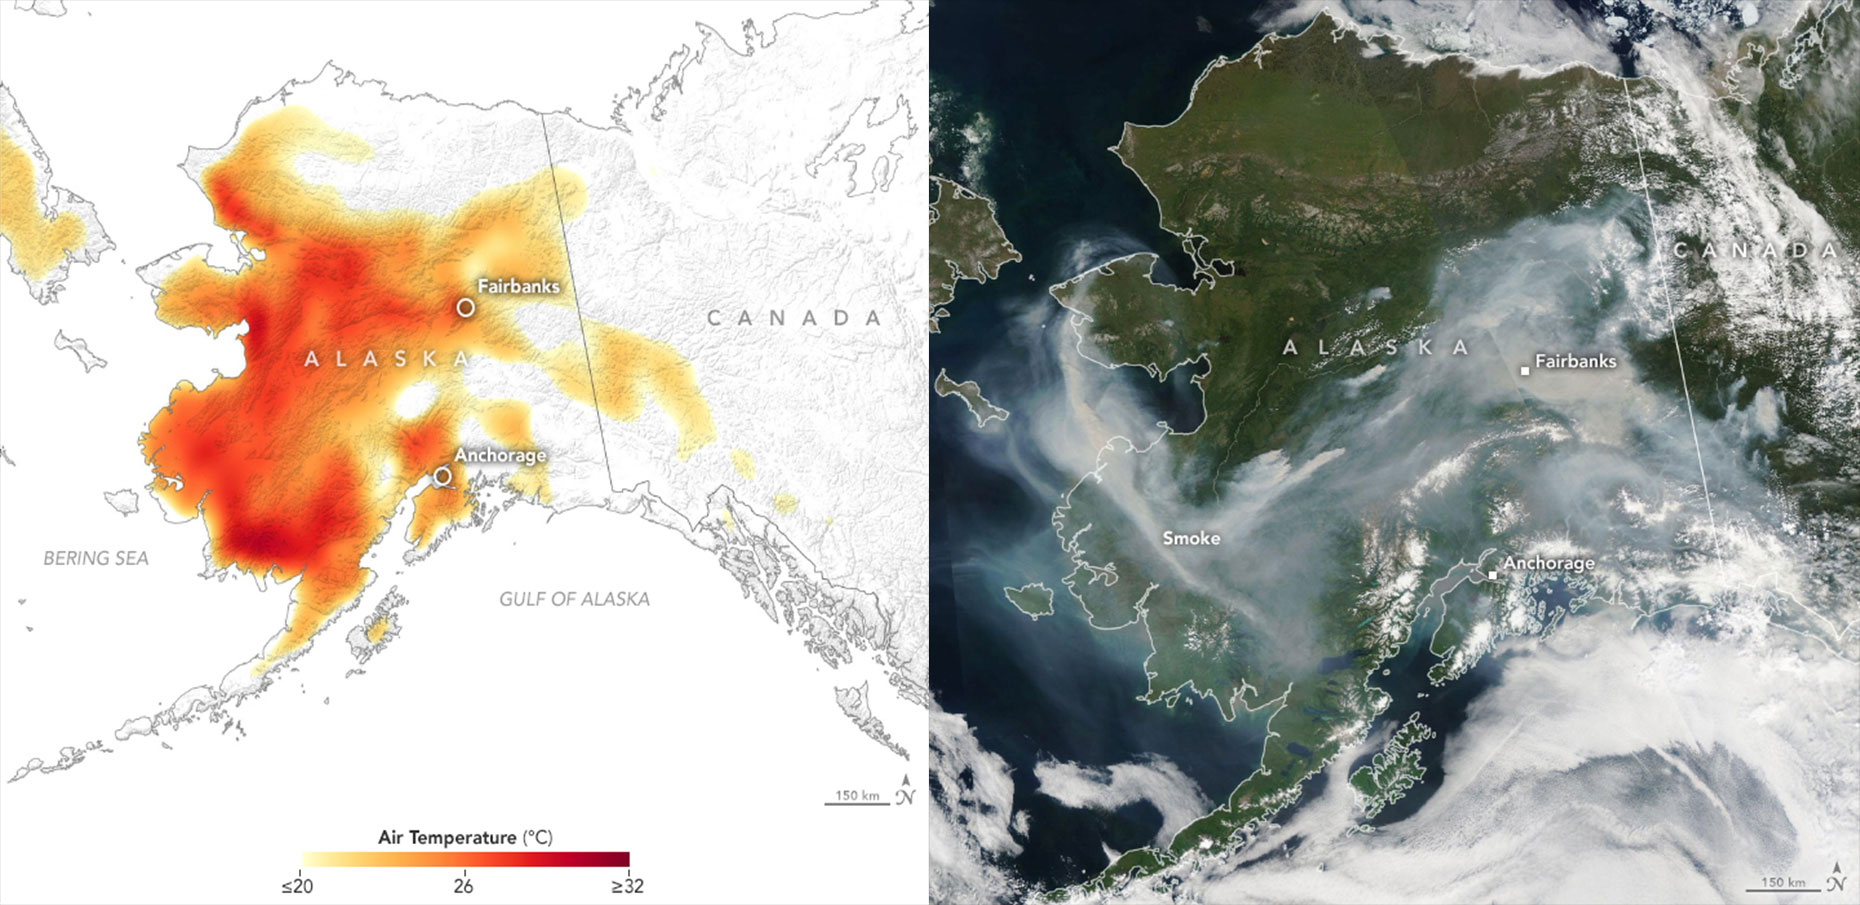 In June and early July 2019, a heat wave in Alaska broke temperature records, as seen in this July 8 air temperature map (left). The corresponding image from the Moderate Resolution Imaging Spectroradiometer (MODIS) instrument on the Aqua satellite on the right shows smoke from lightening-triggered wildfires. Credit: NASA Earth Observatory